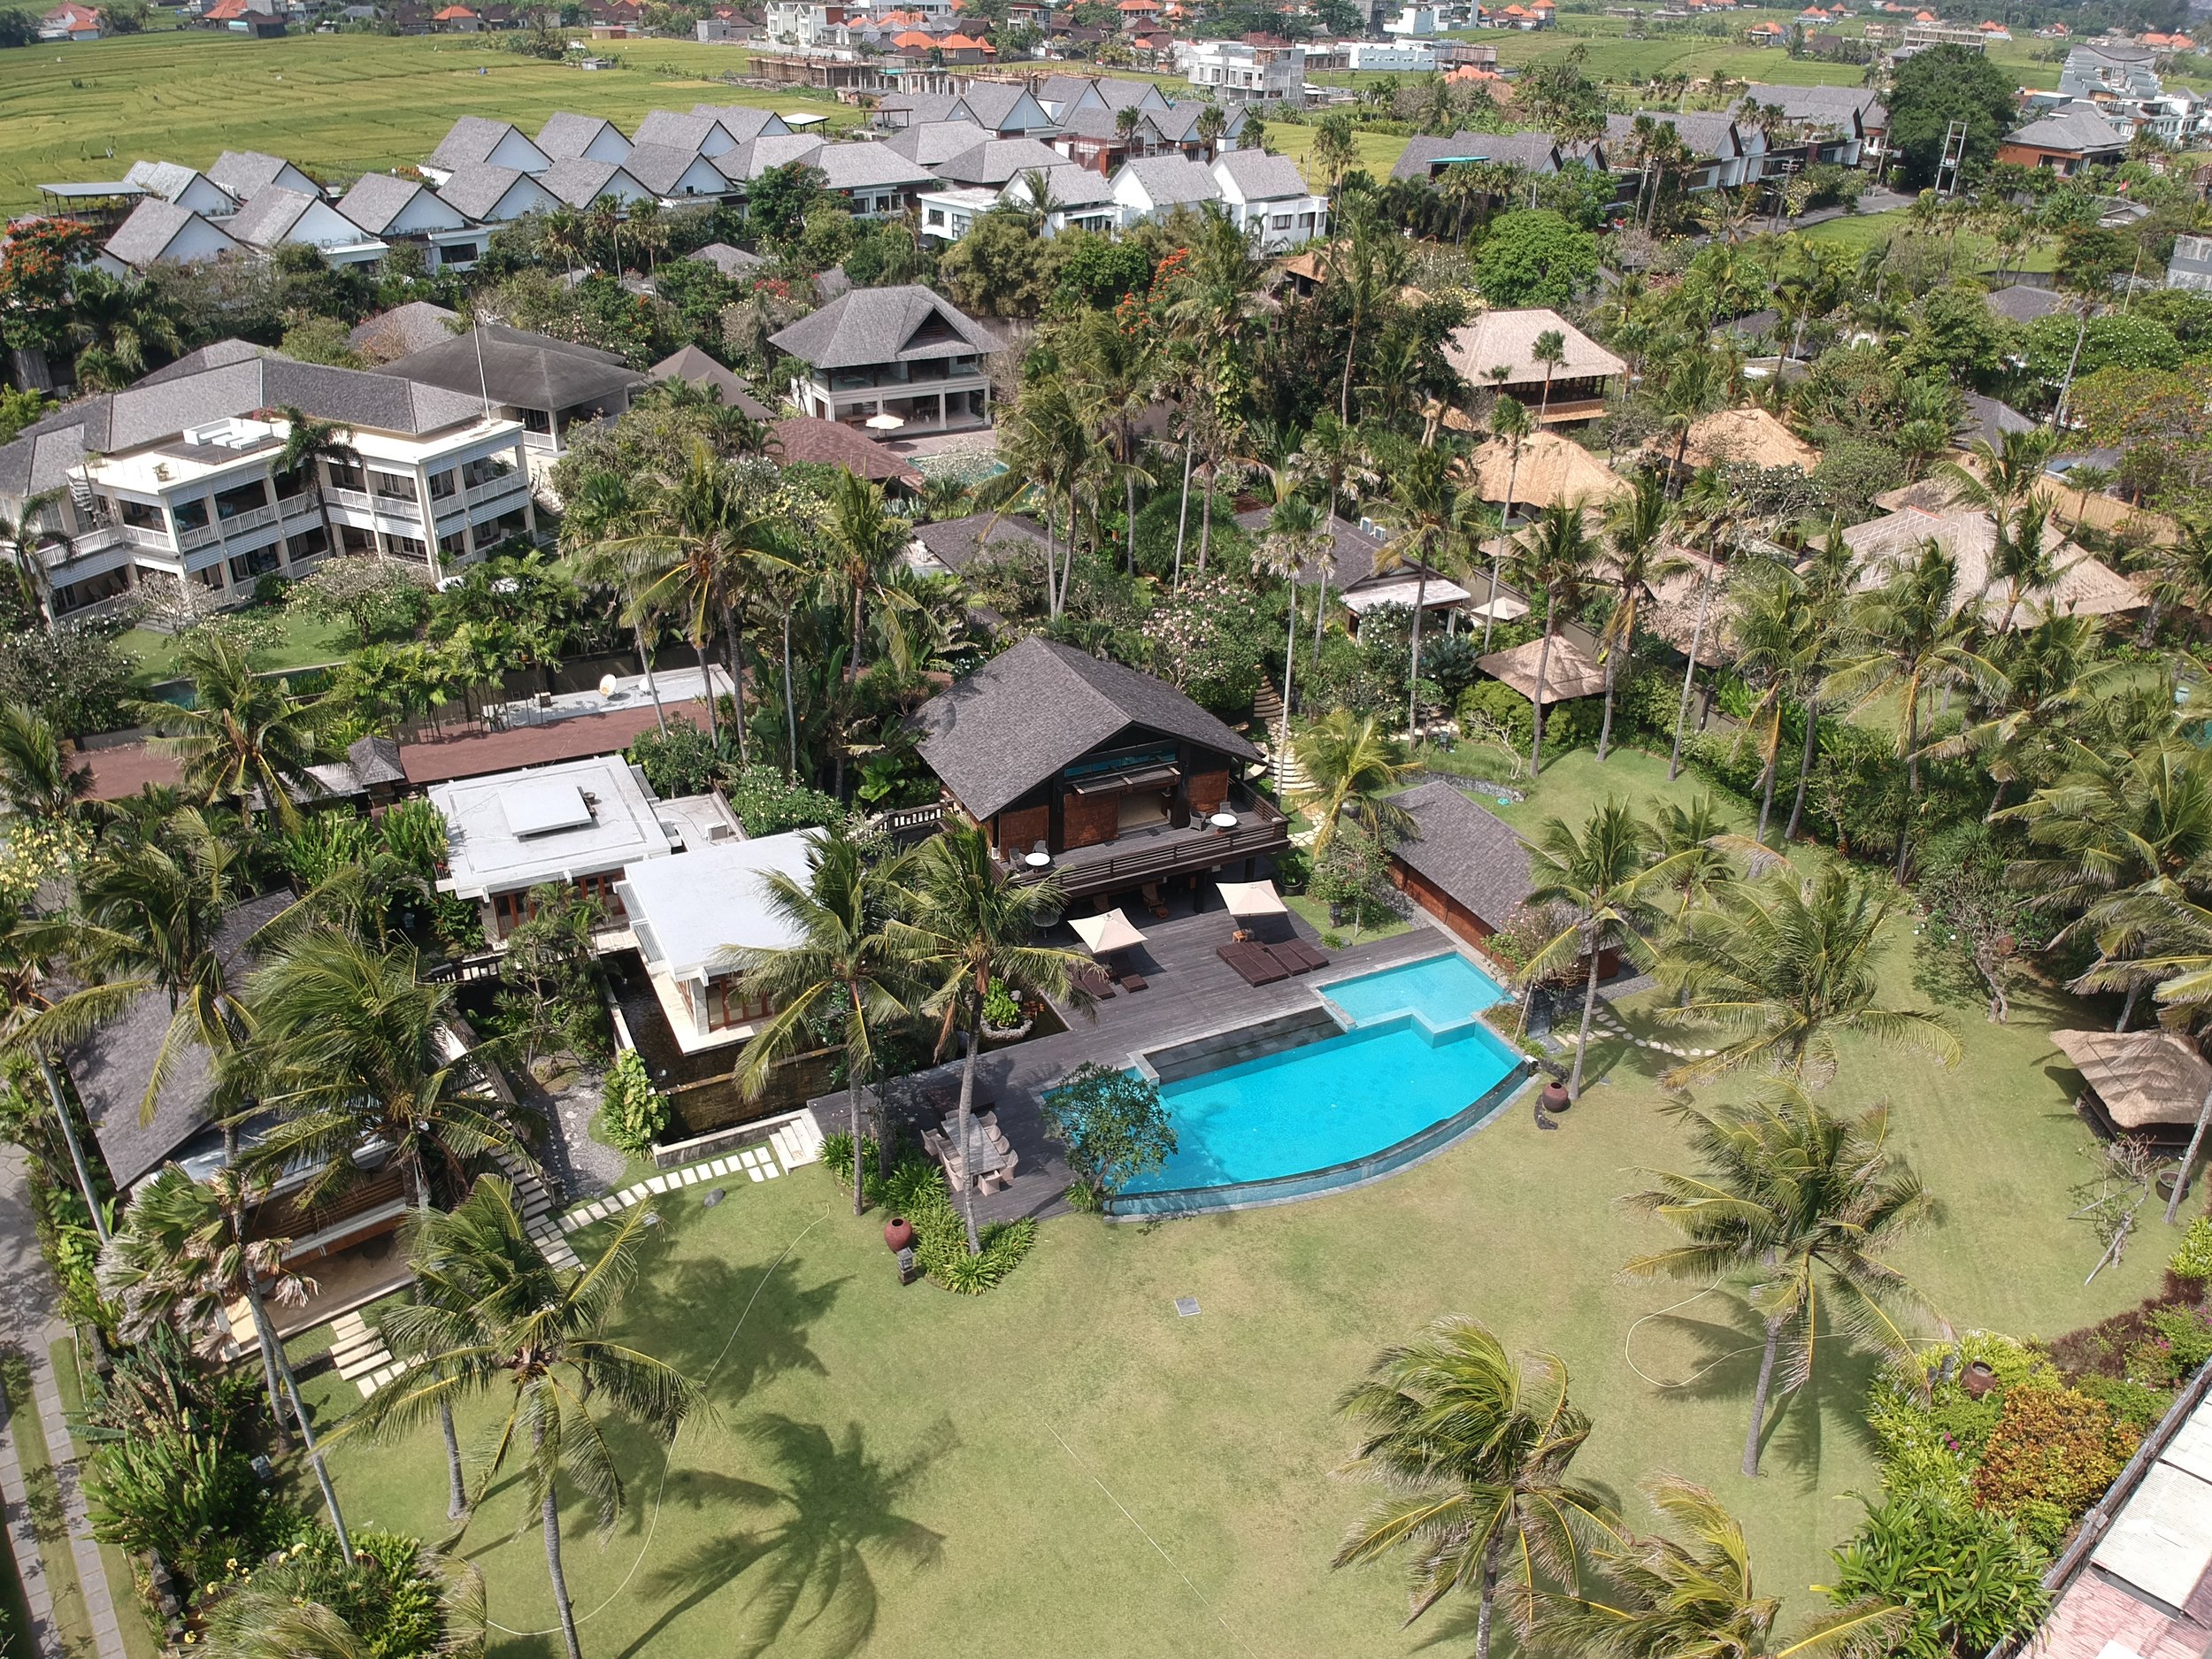 Overview of Villa Semarapura, Image from A Tent in Bali